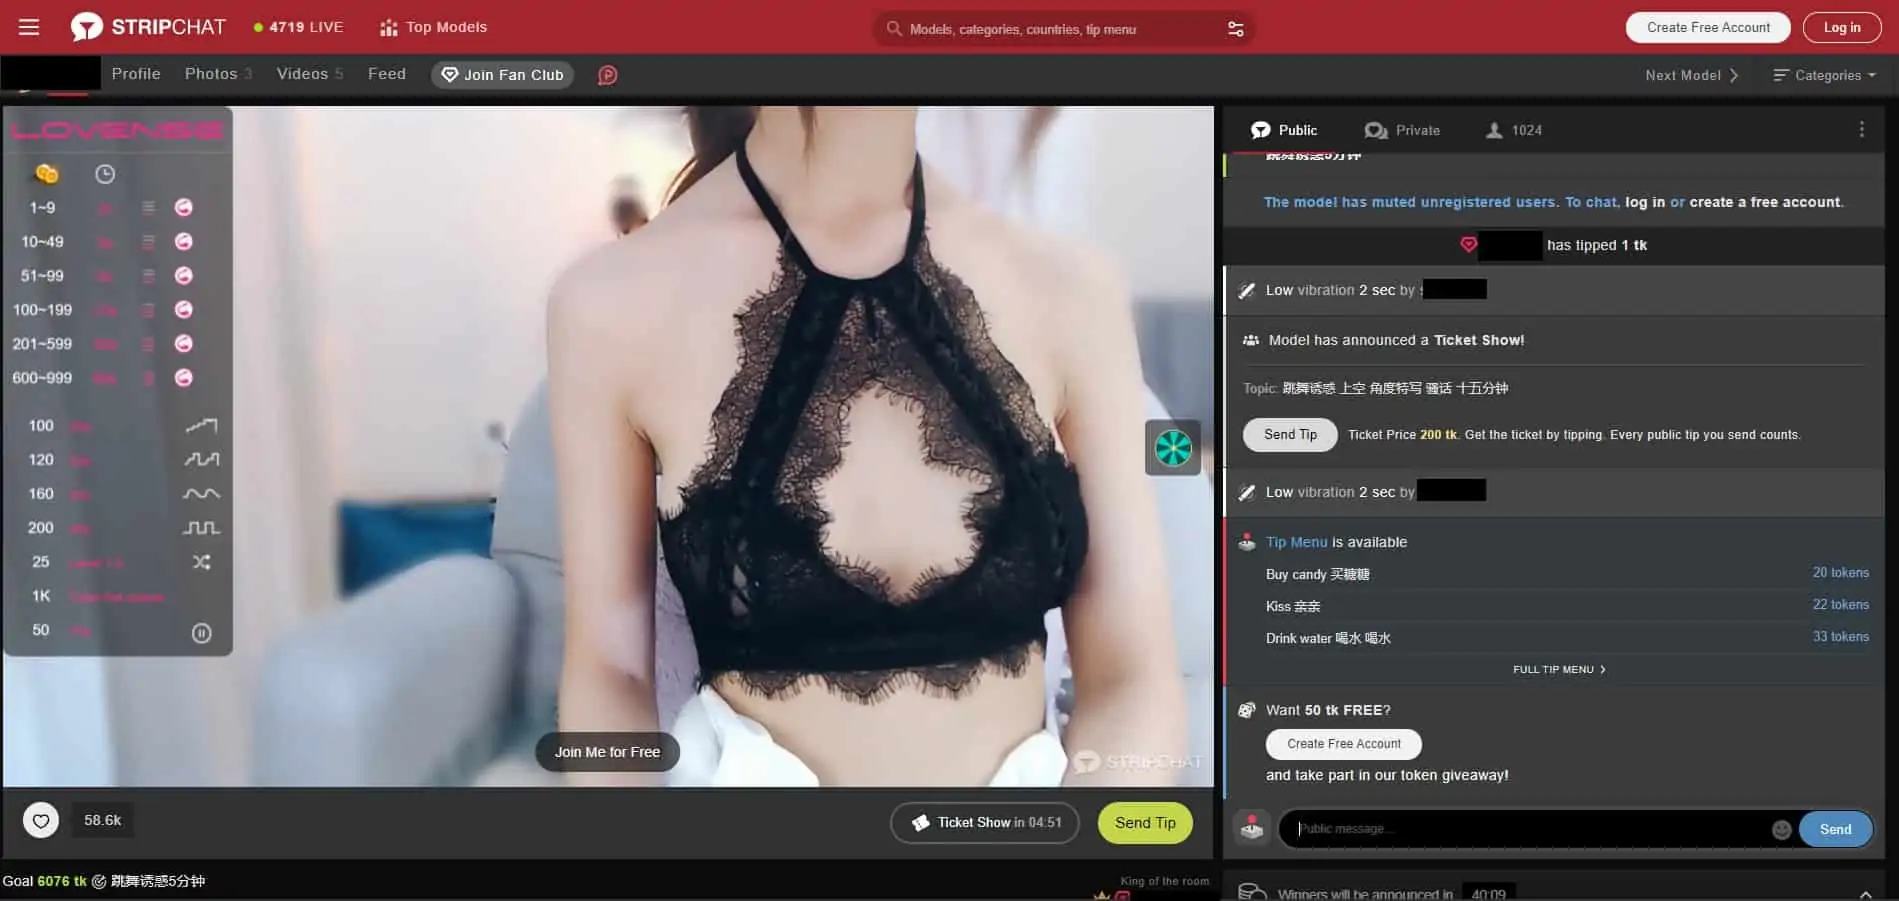 Sex cam site Stripchat exposes user, model info on the web report image photo